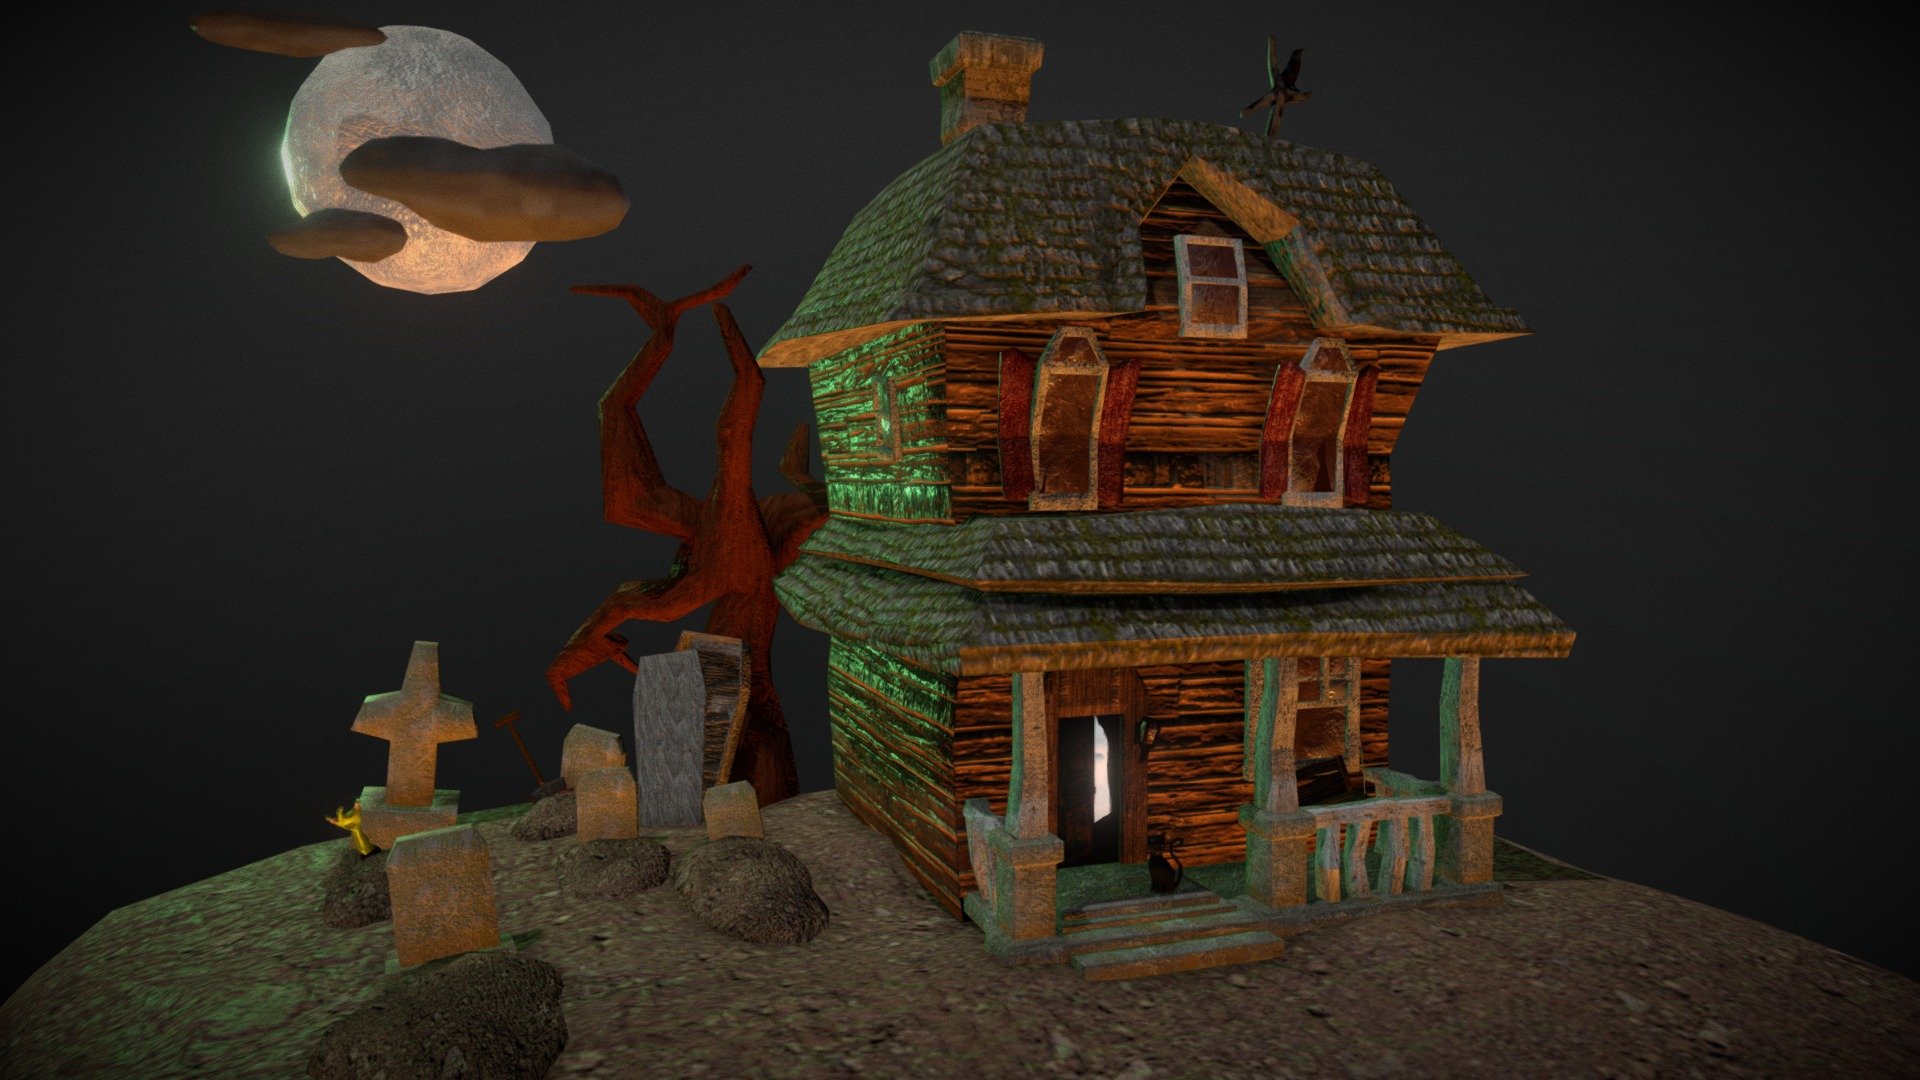 SpookHouse is a 3d Model based on a drawing I created 4 years ago. (UPDATED: Added Formats + Textures Files)

SOLVE THE SPOOKHOUSE MYSTERY to Win this Asset Pack!
~ CORRECT CLUE = Another Hint
~ CORRECT ANSWER = FREE SPOOKHOUSE SET

Beyond Spook House Mansion,
Hidden deep within it's walls,
Resides an olde mystery,
In the shroud of darkness,
Just waiting to be solved,
Over a hundred years ago,
A man once lived here,
Built by this old place,
Brick to board by brick,
Ending in sweat and tears,
Some say he was loved,
Others simply said stay away,
Family, said they opposed,
Loving his kids and wife,
Then one day not a sound,
They all just disappeared,
Many claimed of screams,
That echoed for miles on end,
As blood let from the moon,
He and his kin had vanished,
Relatives all came to look,
As forgotten, all who arrived,
This old place became cursed,
To anyone who stopped by,
They too went missing,
Never ever to be found,
Except for this torn note,
Left behind, that reads:

 - SpookHouse - Buy Royalty Free 3D model by Skywolf Game Studios (@SkywolfGameStudios) 3d model